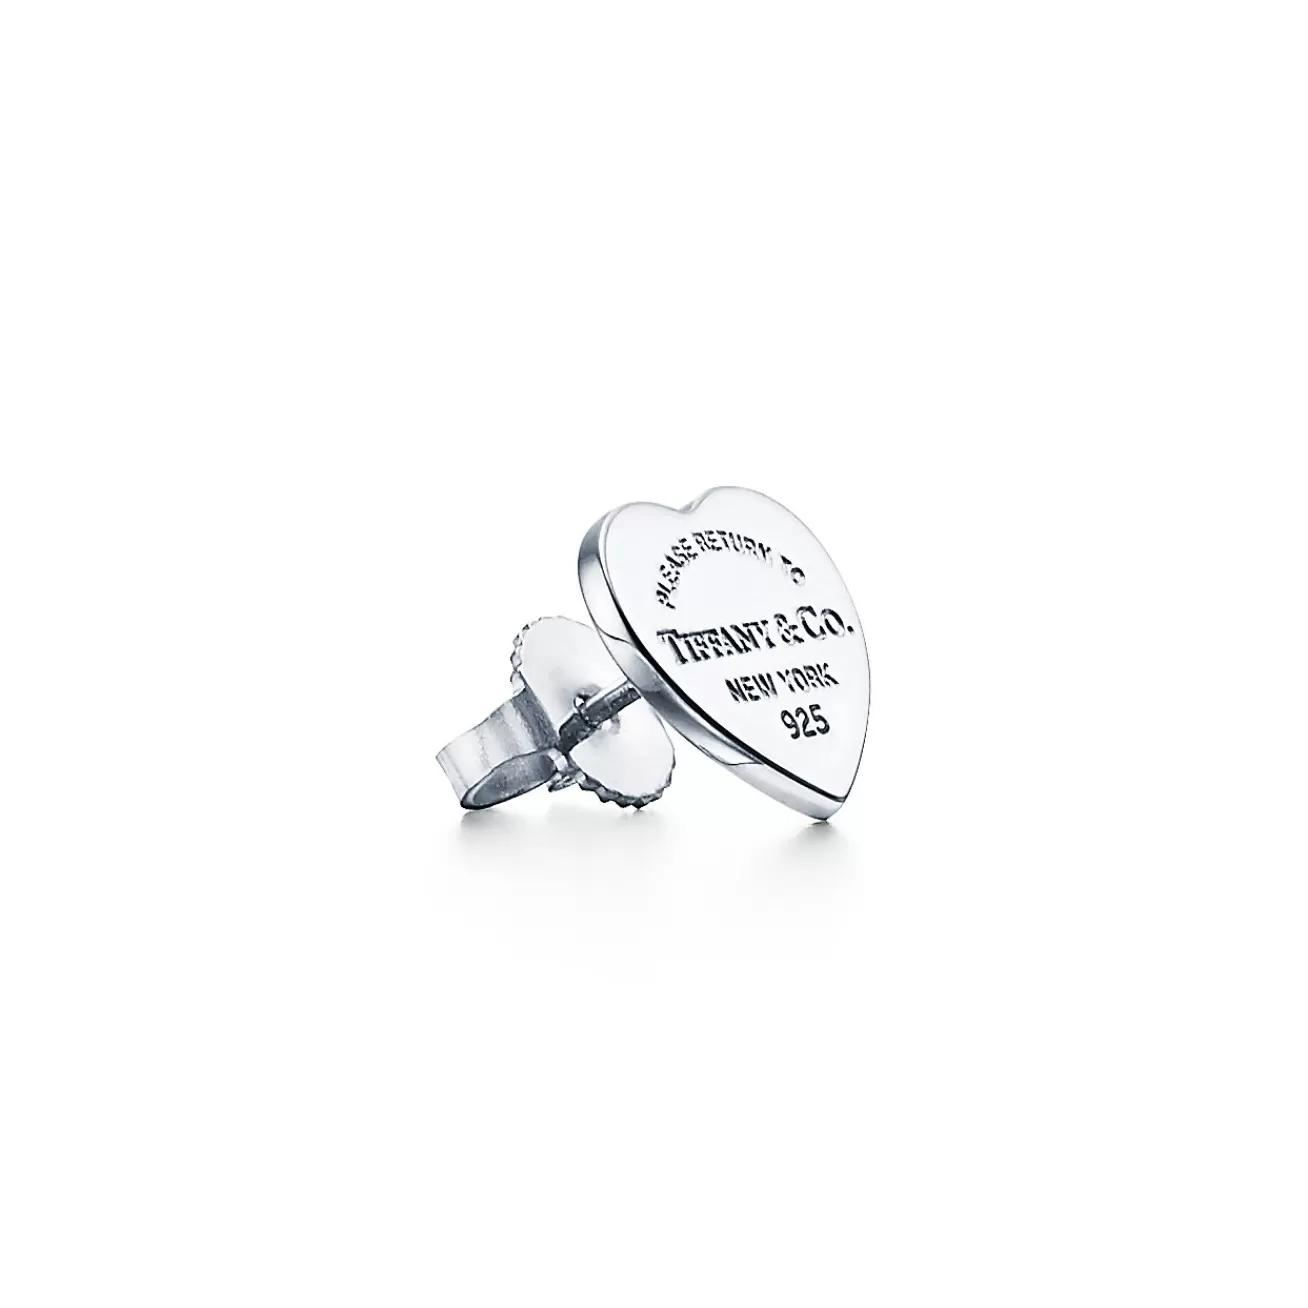 Tiffany & Co. Return to Tiffany® Heart Tag Stud Earrings in Silver, Mini | ^ Earrings | Gifts for Her